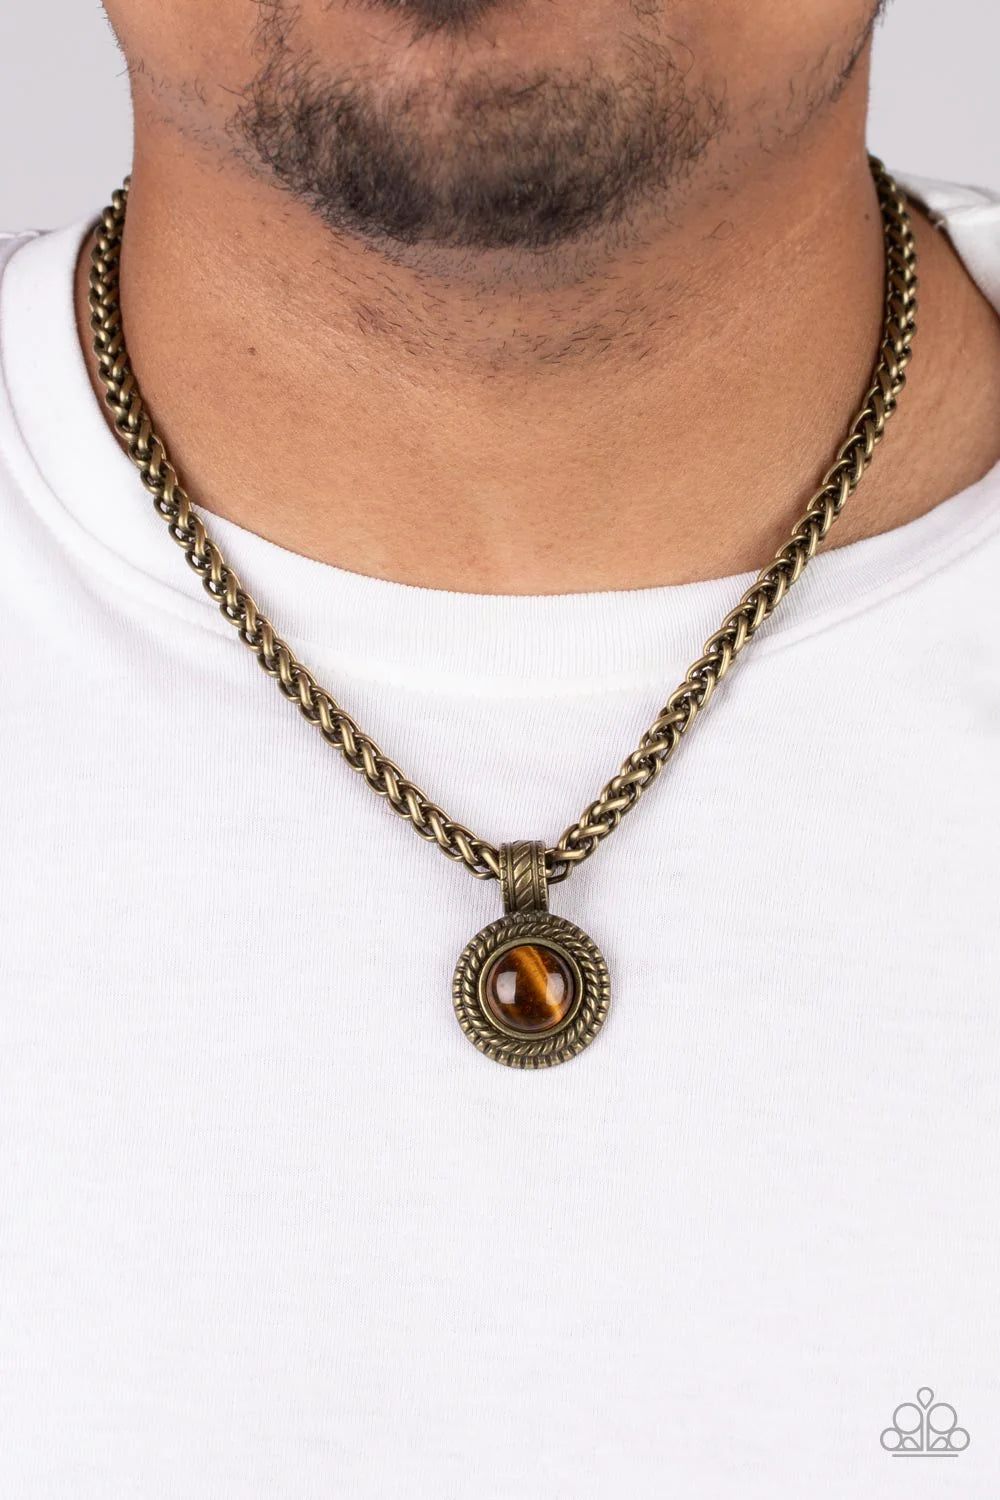 Paparazzi Accessories Pendant Dreams - Brass A textured brass frame spins around a tiger's eye stone center, creating a tranquil statement piece. The reflective pendant is anchored by a textured brass fixture, adding eye-catching dimension as the pendant